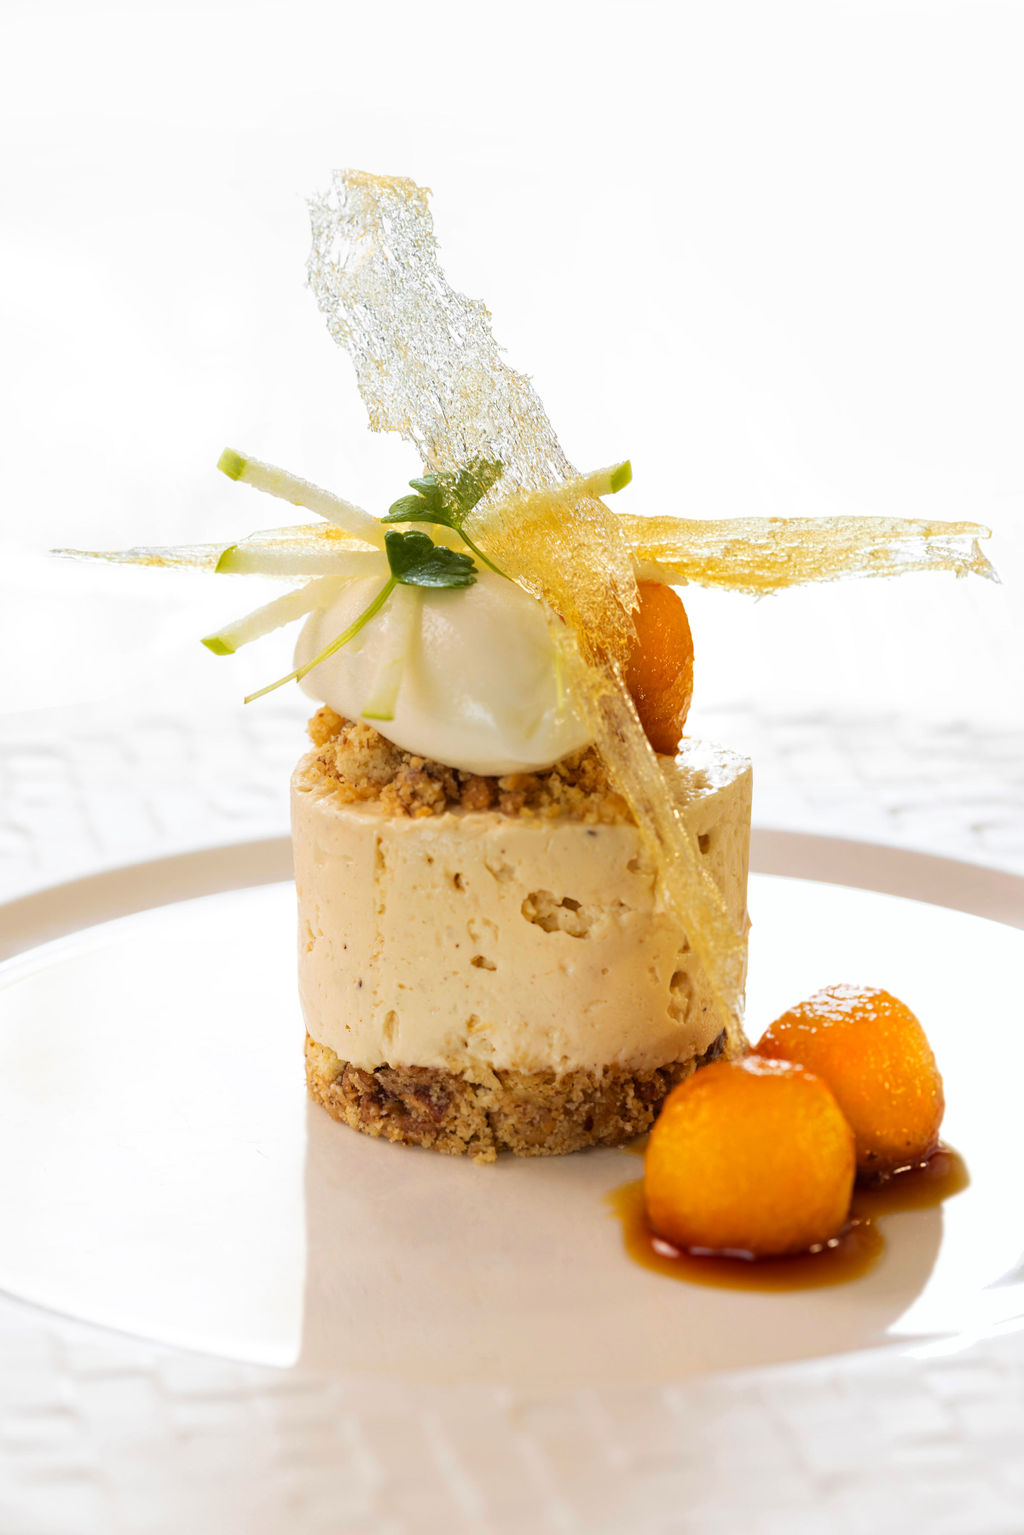 Food Photography Tim Allens Restaurant West Aughton So-lo Food Photographer Michelin Star chef